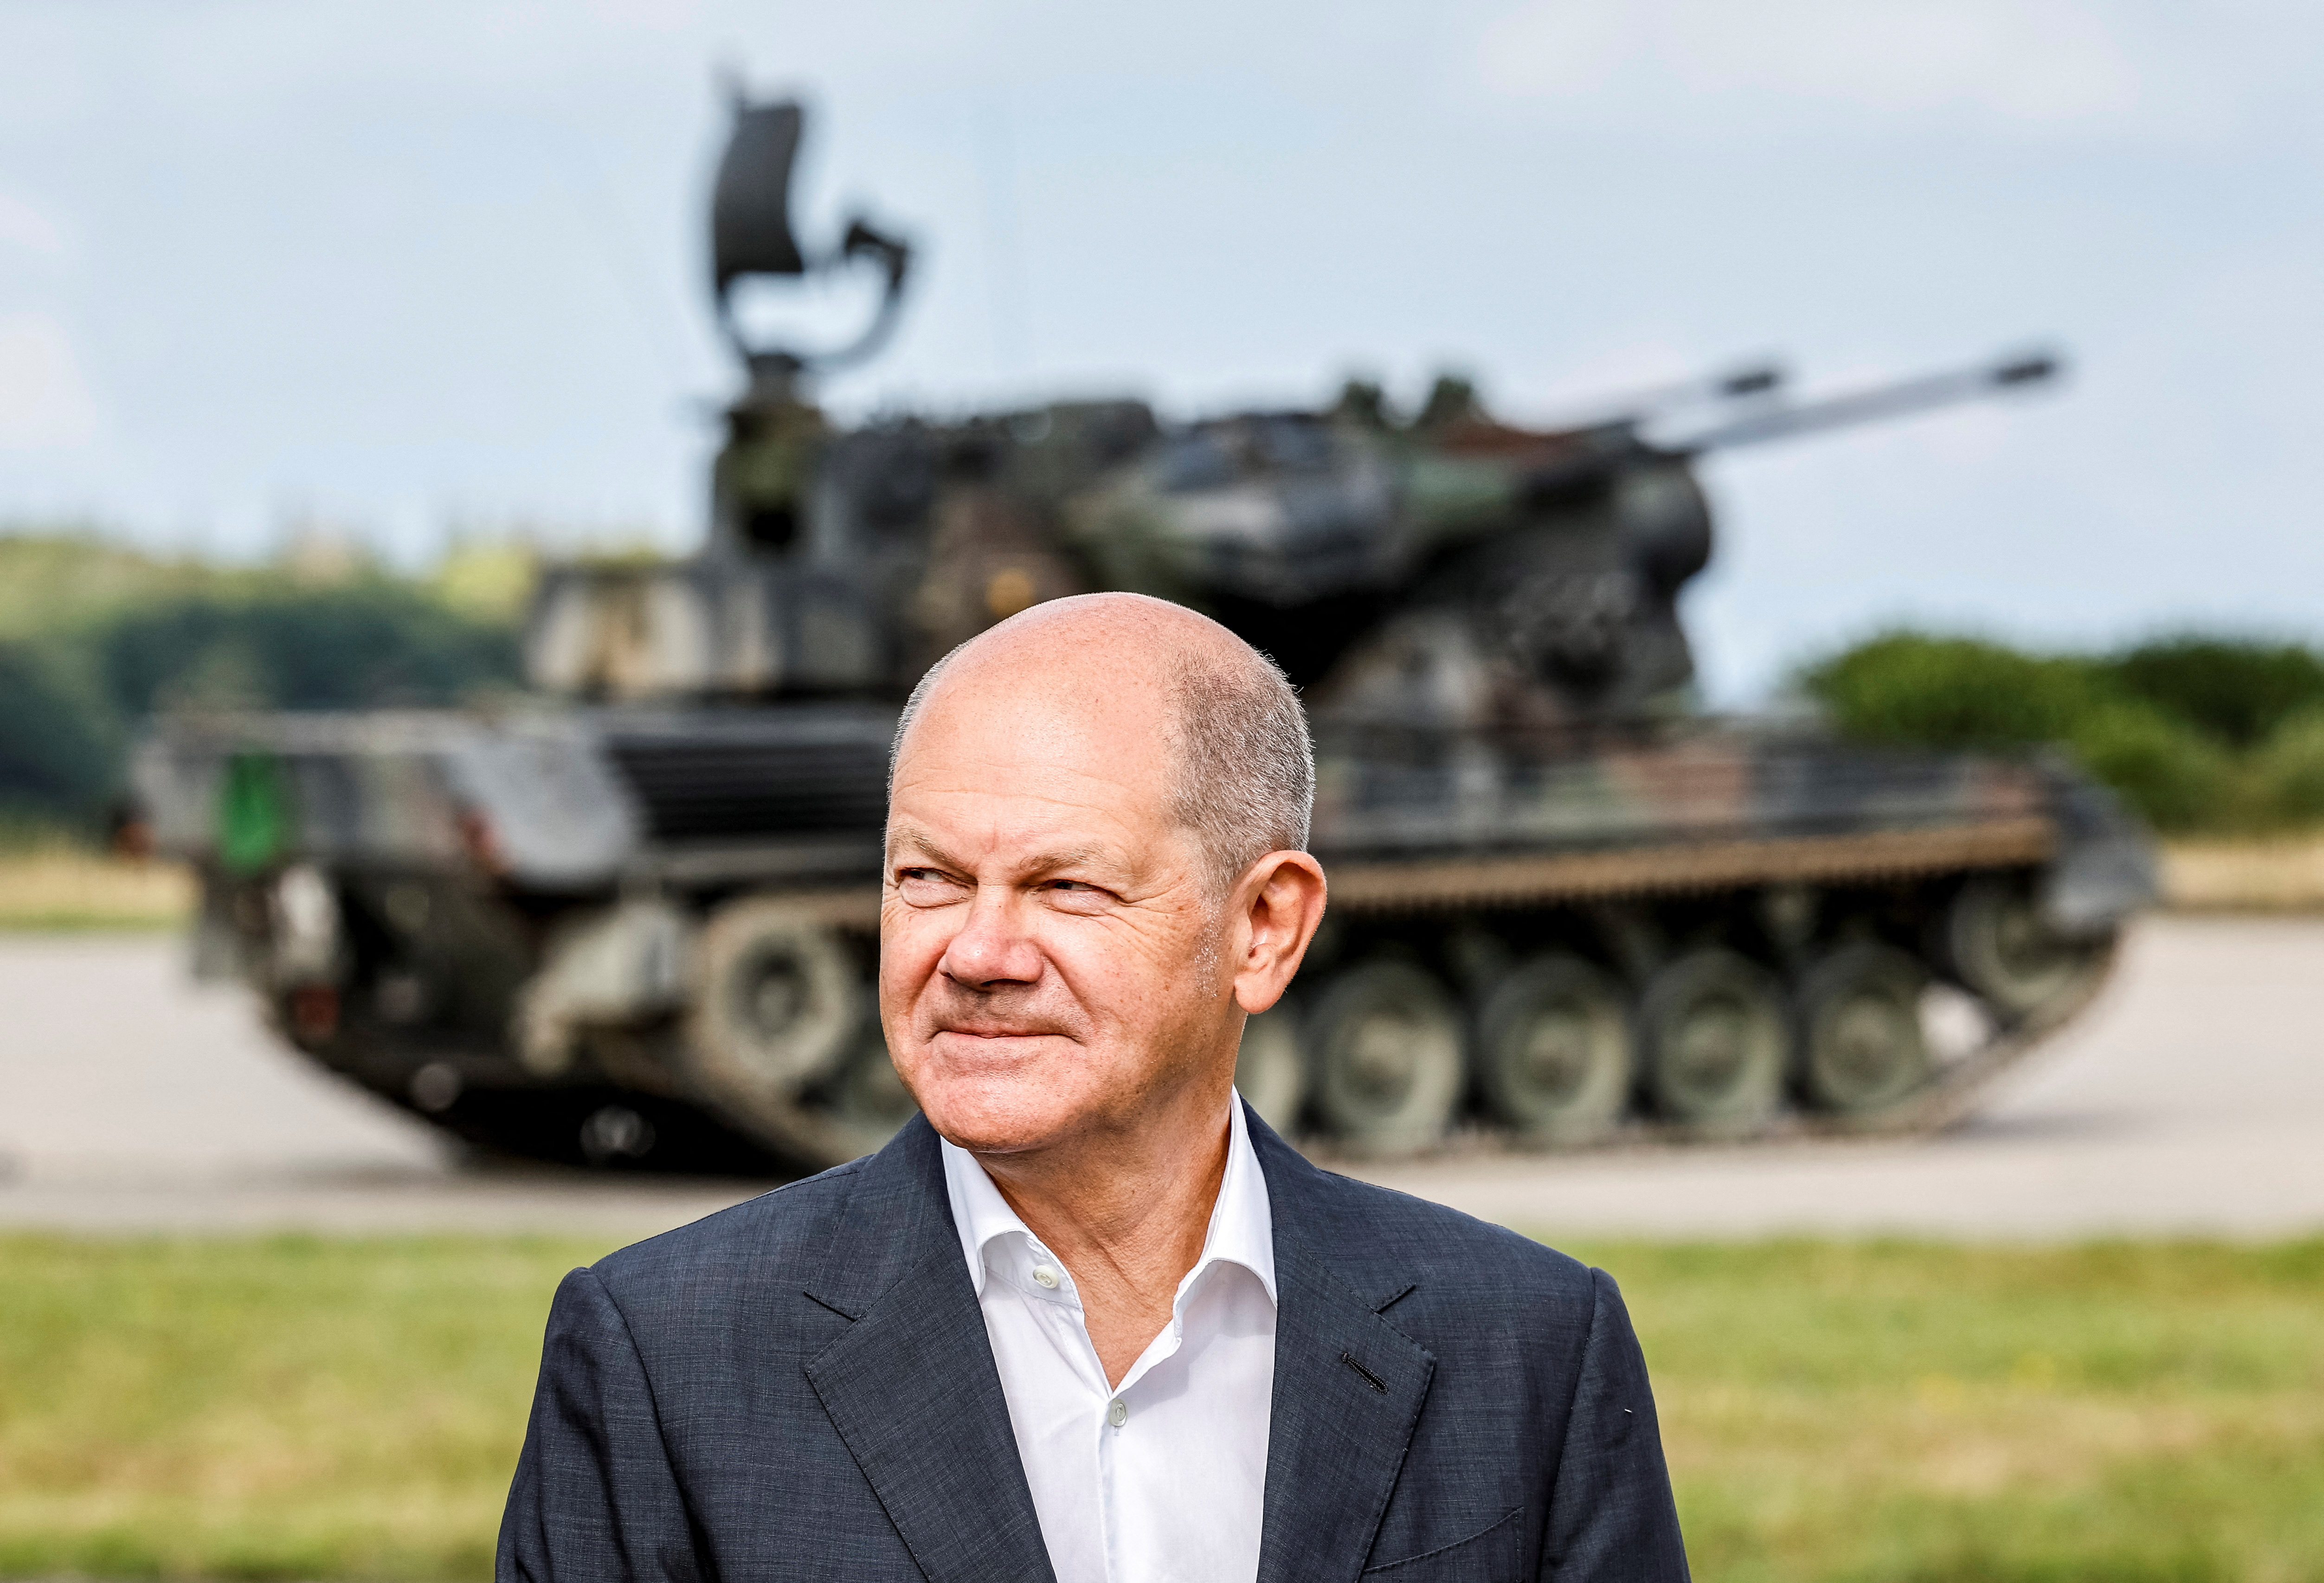 German Chancellor Olaf Scholz visit of the training program for Ukrainian soldiers on the Gepard anti-aircraft tank in Putlos near Oldenburg